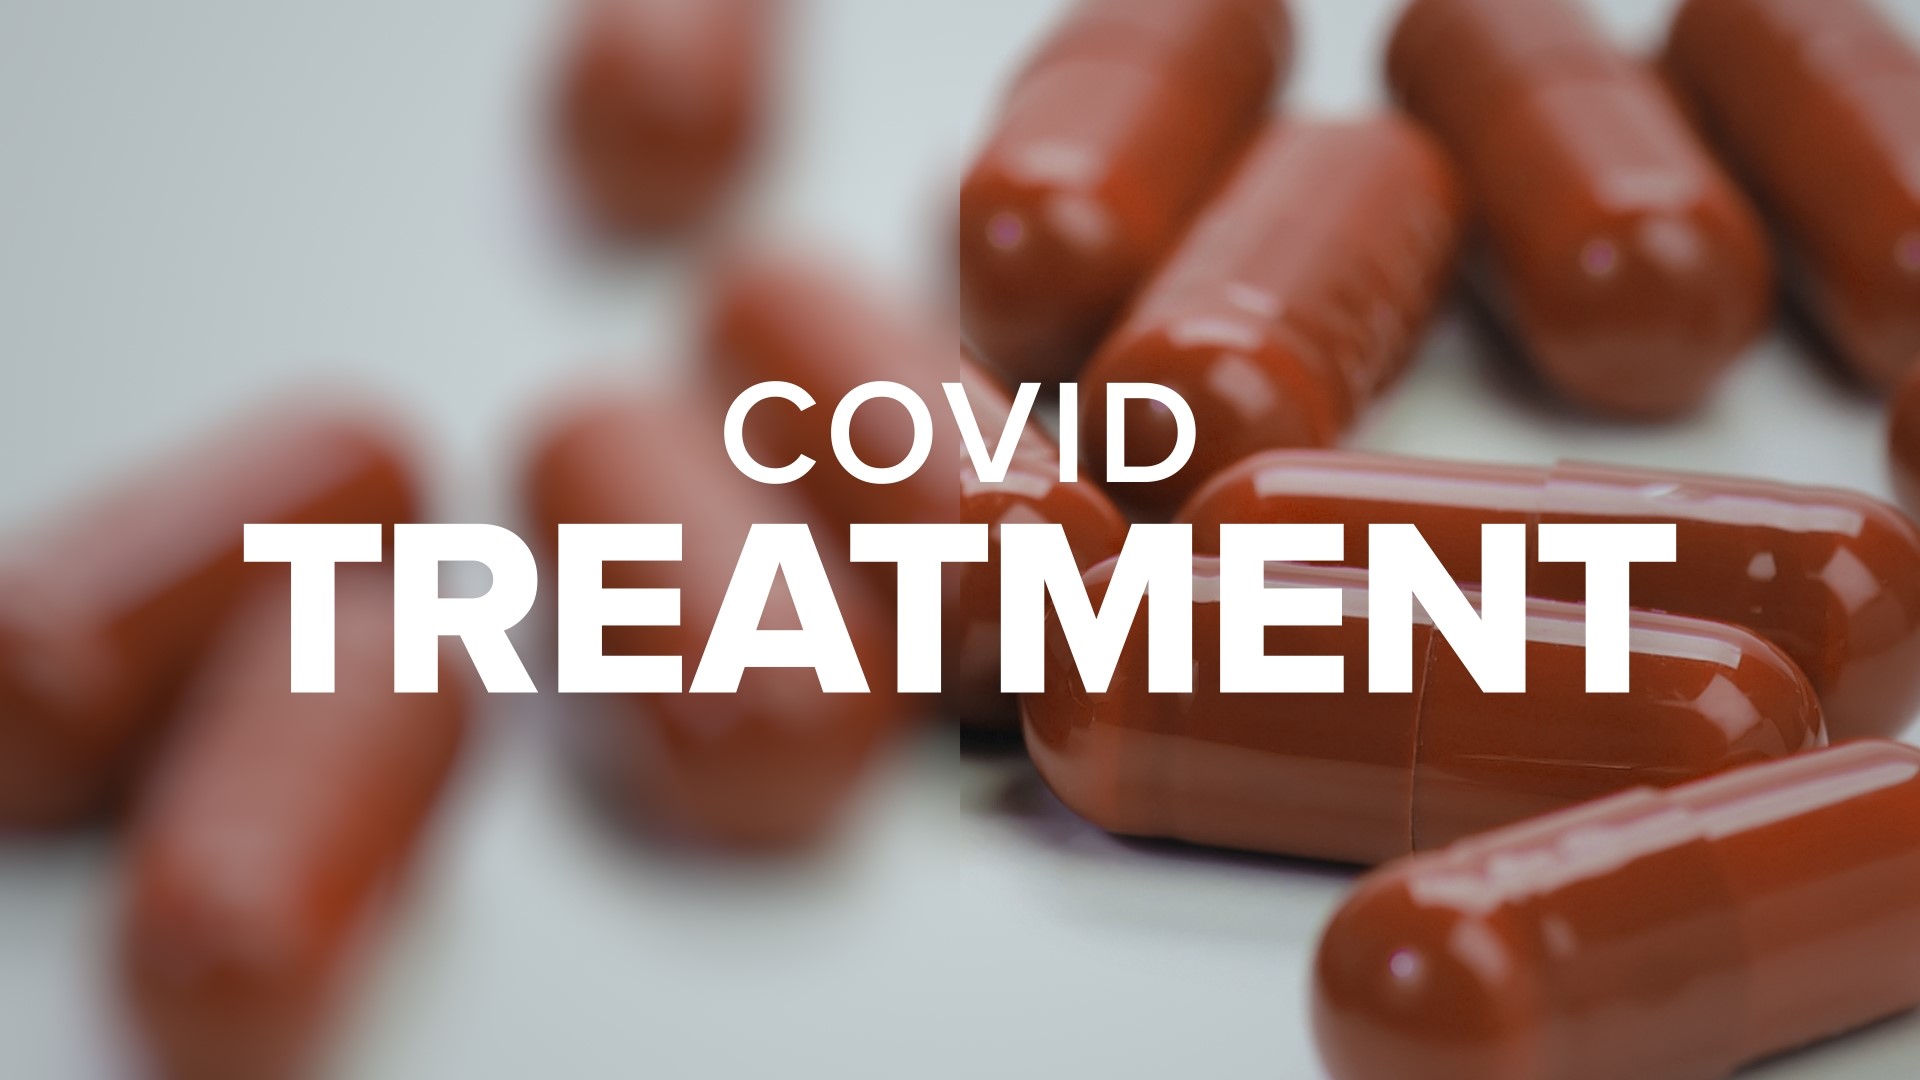 The Biden administration recently announced it is expanding the availability of antiviral treatment for COVID-19.